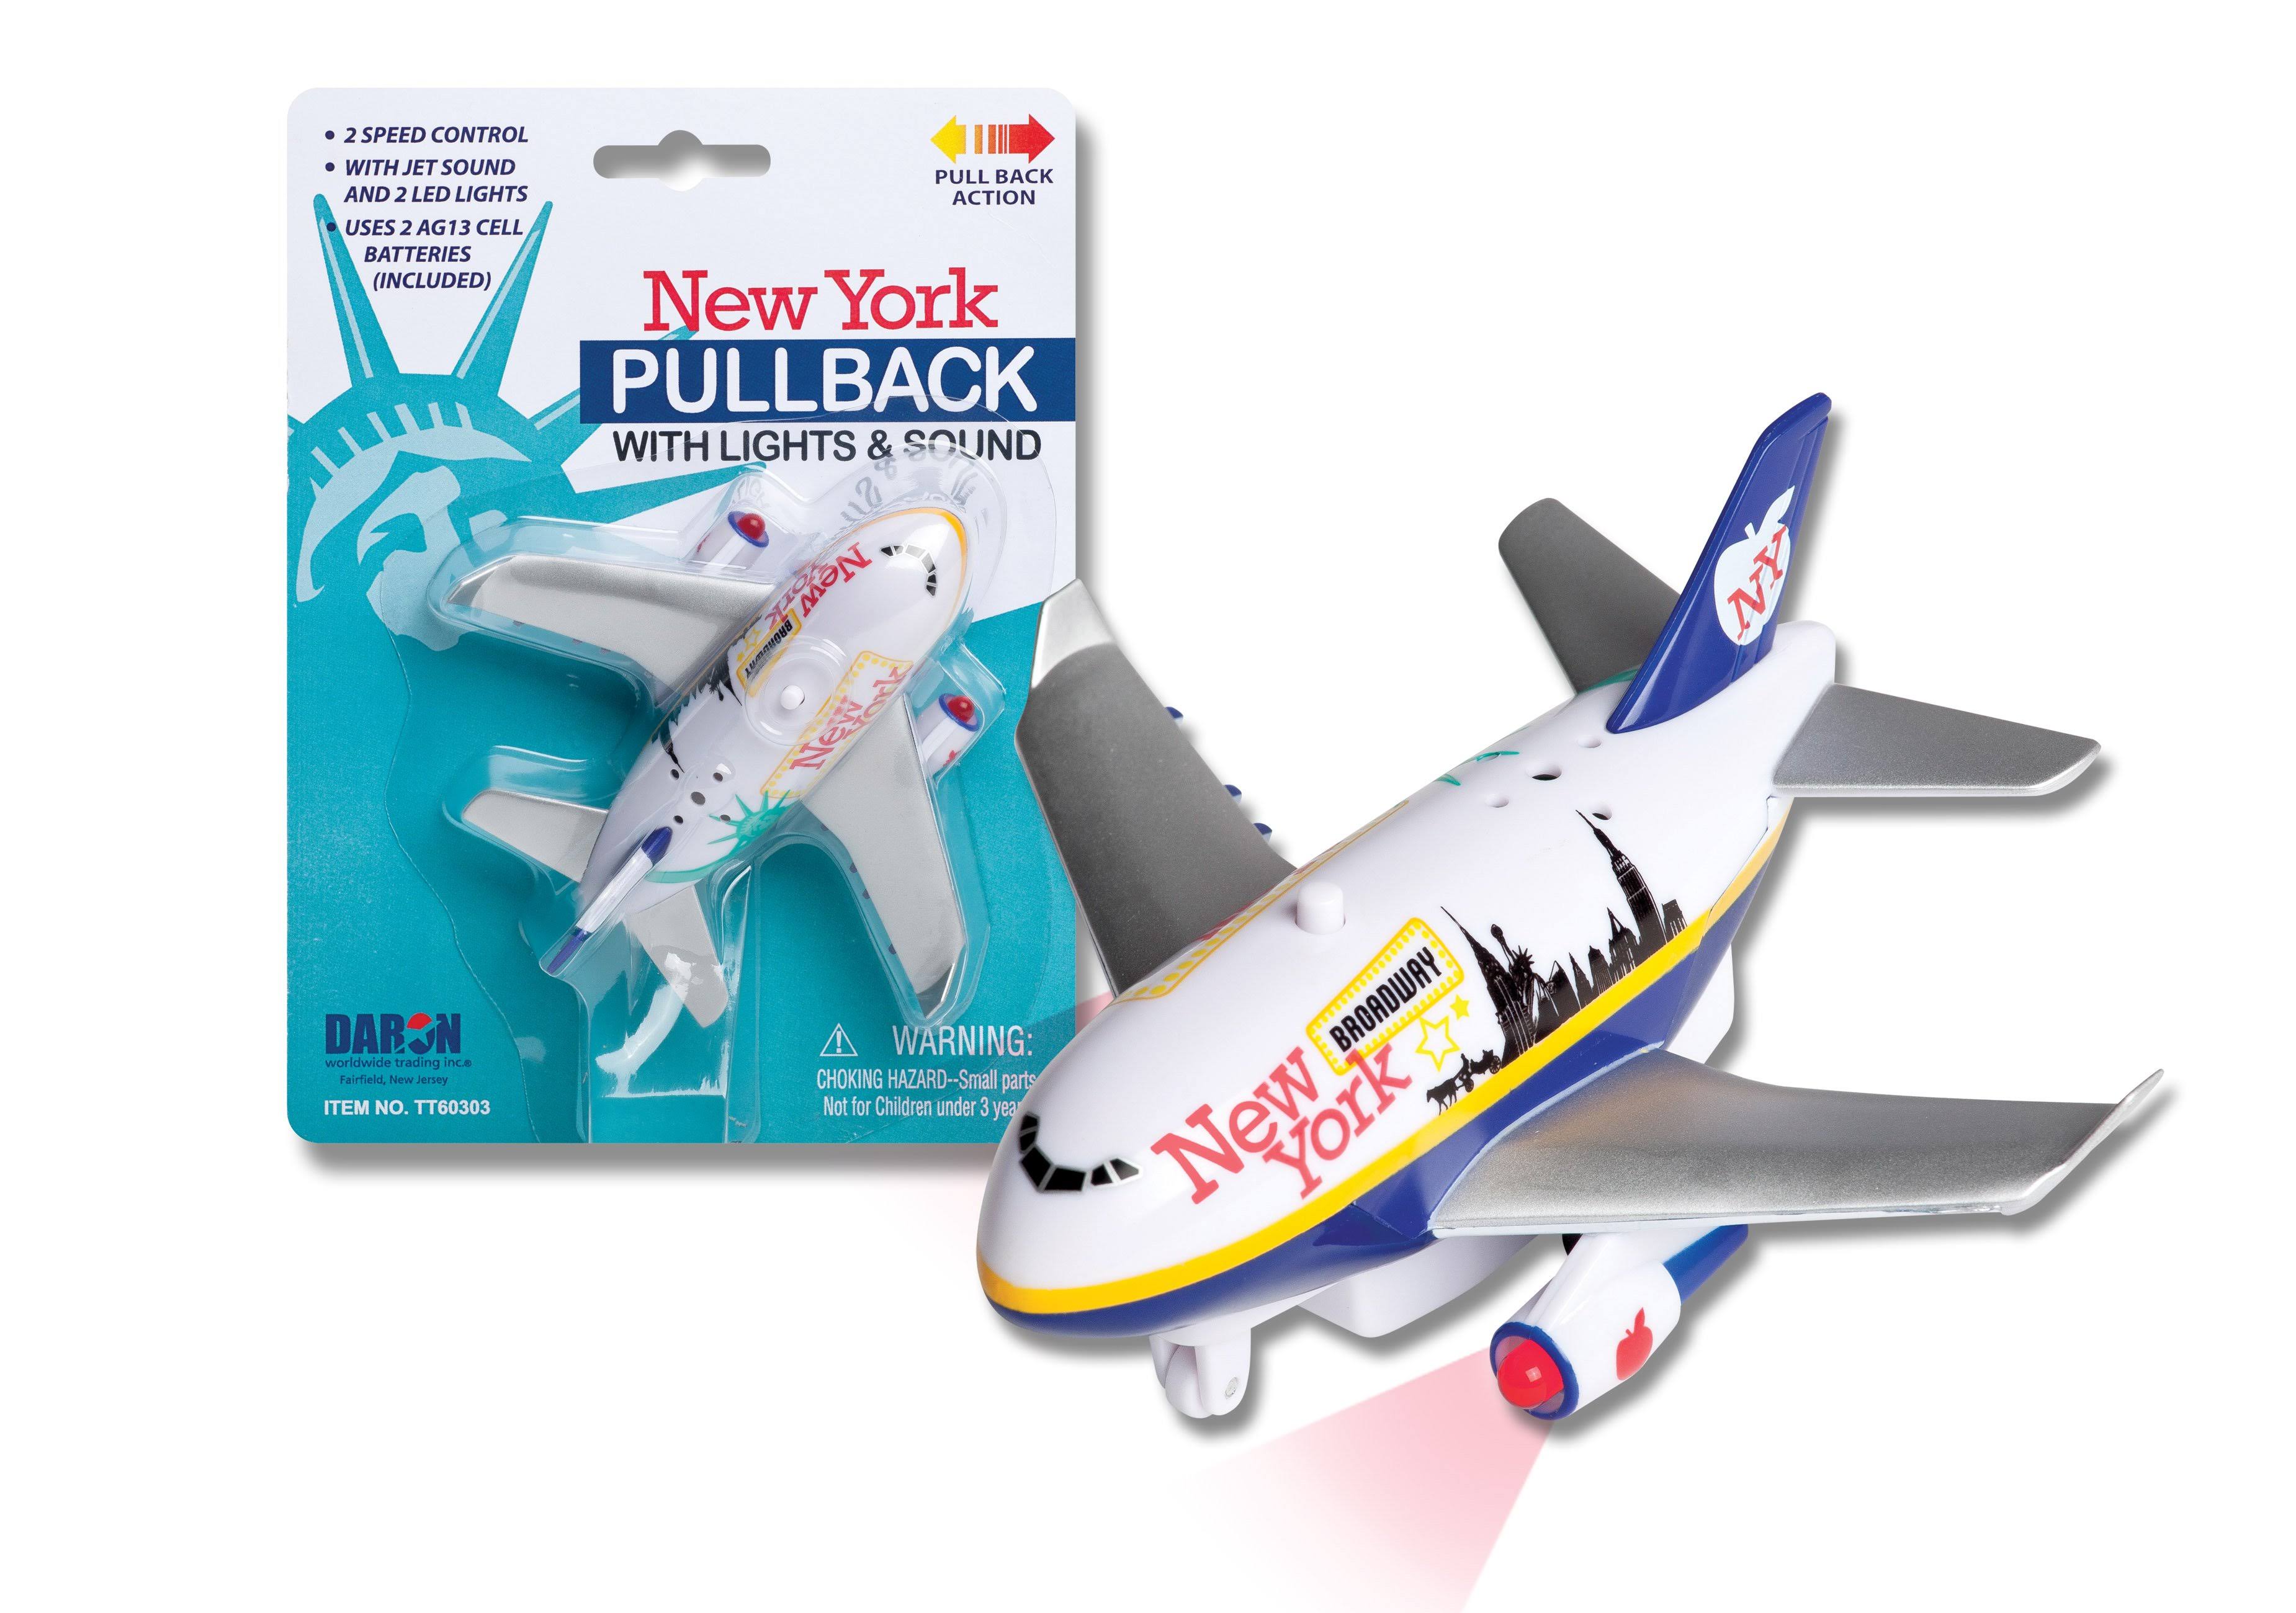 Daron Delta Pullback Plane with Light and Sound Toy